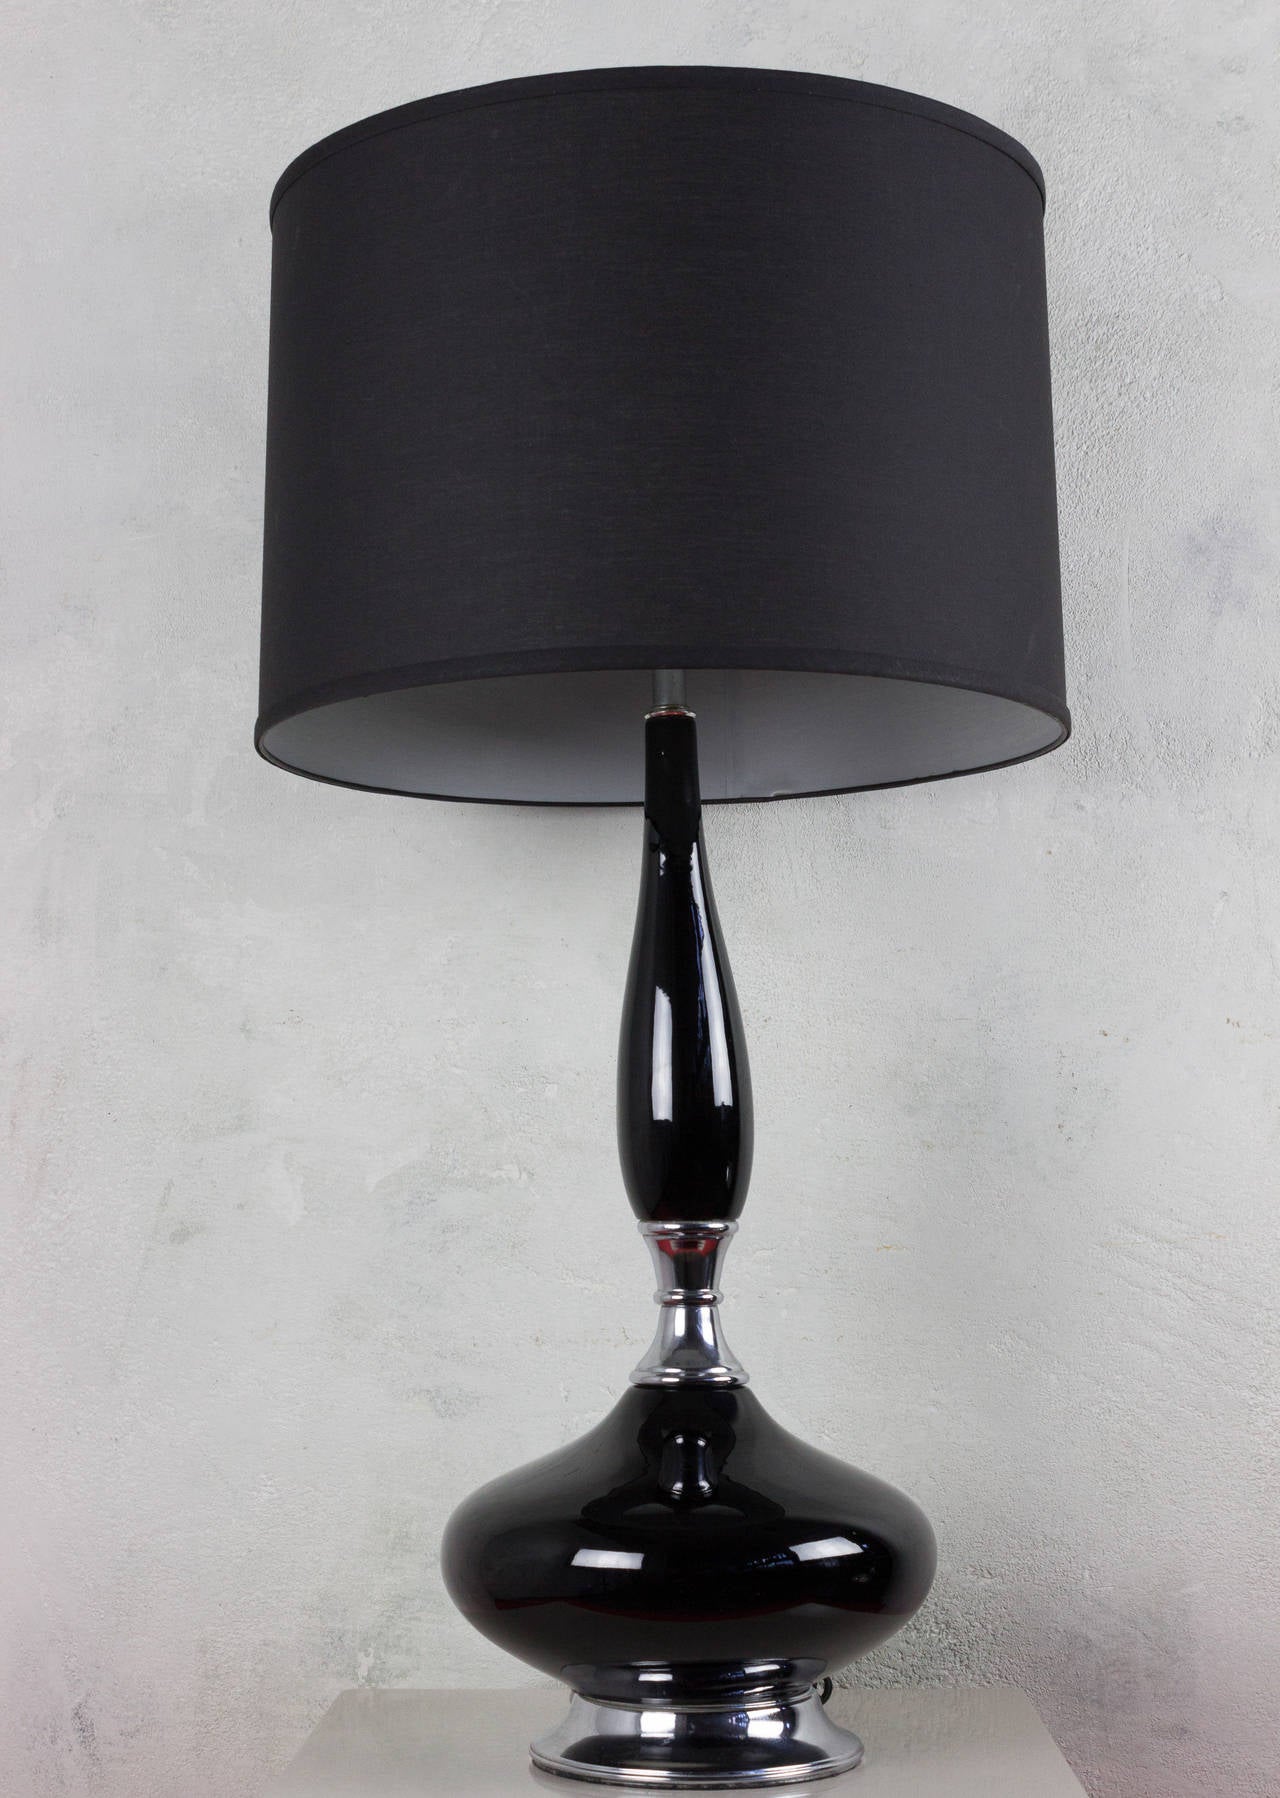 Hollywood Glam black ceramic lamp with chrome base and details. Very good vintage condition.

Not sold with shade.

Ref #: LT0115-03

Dimensions: 38